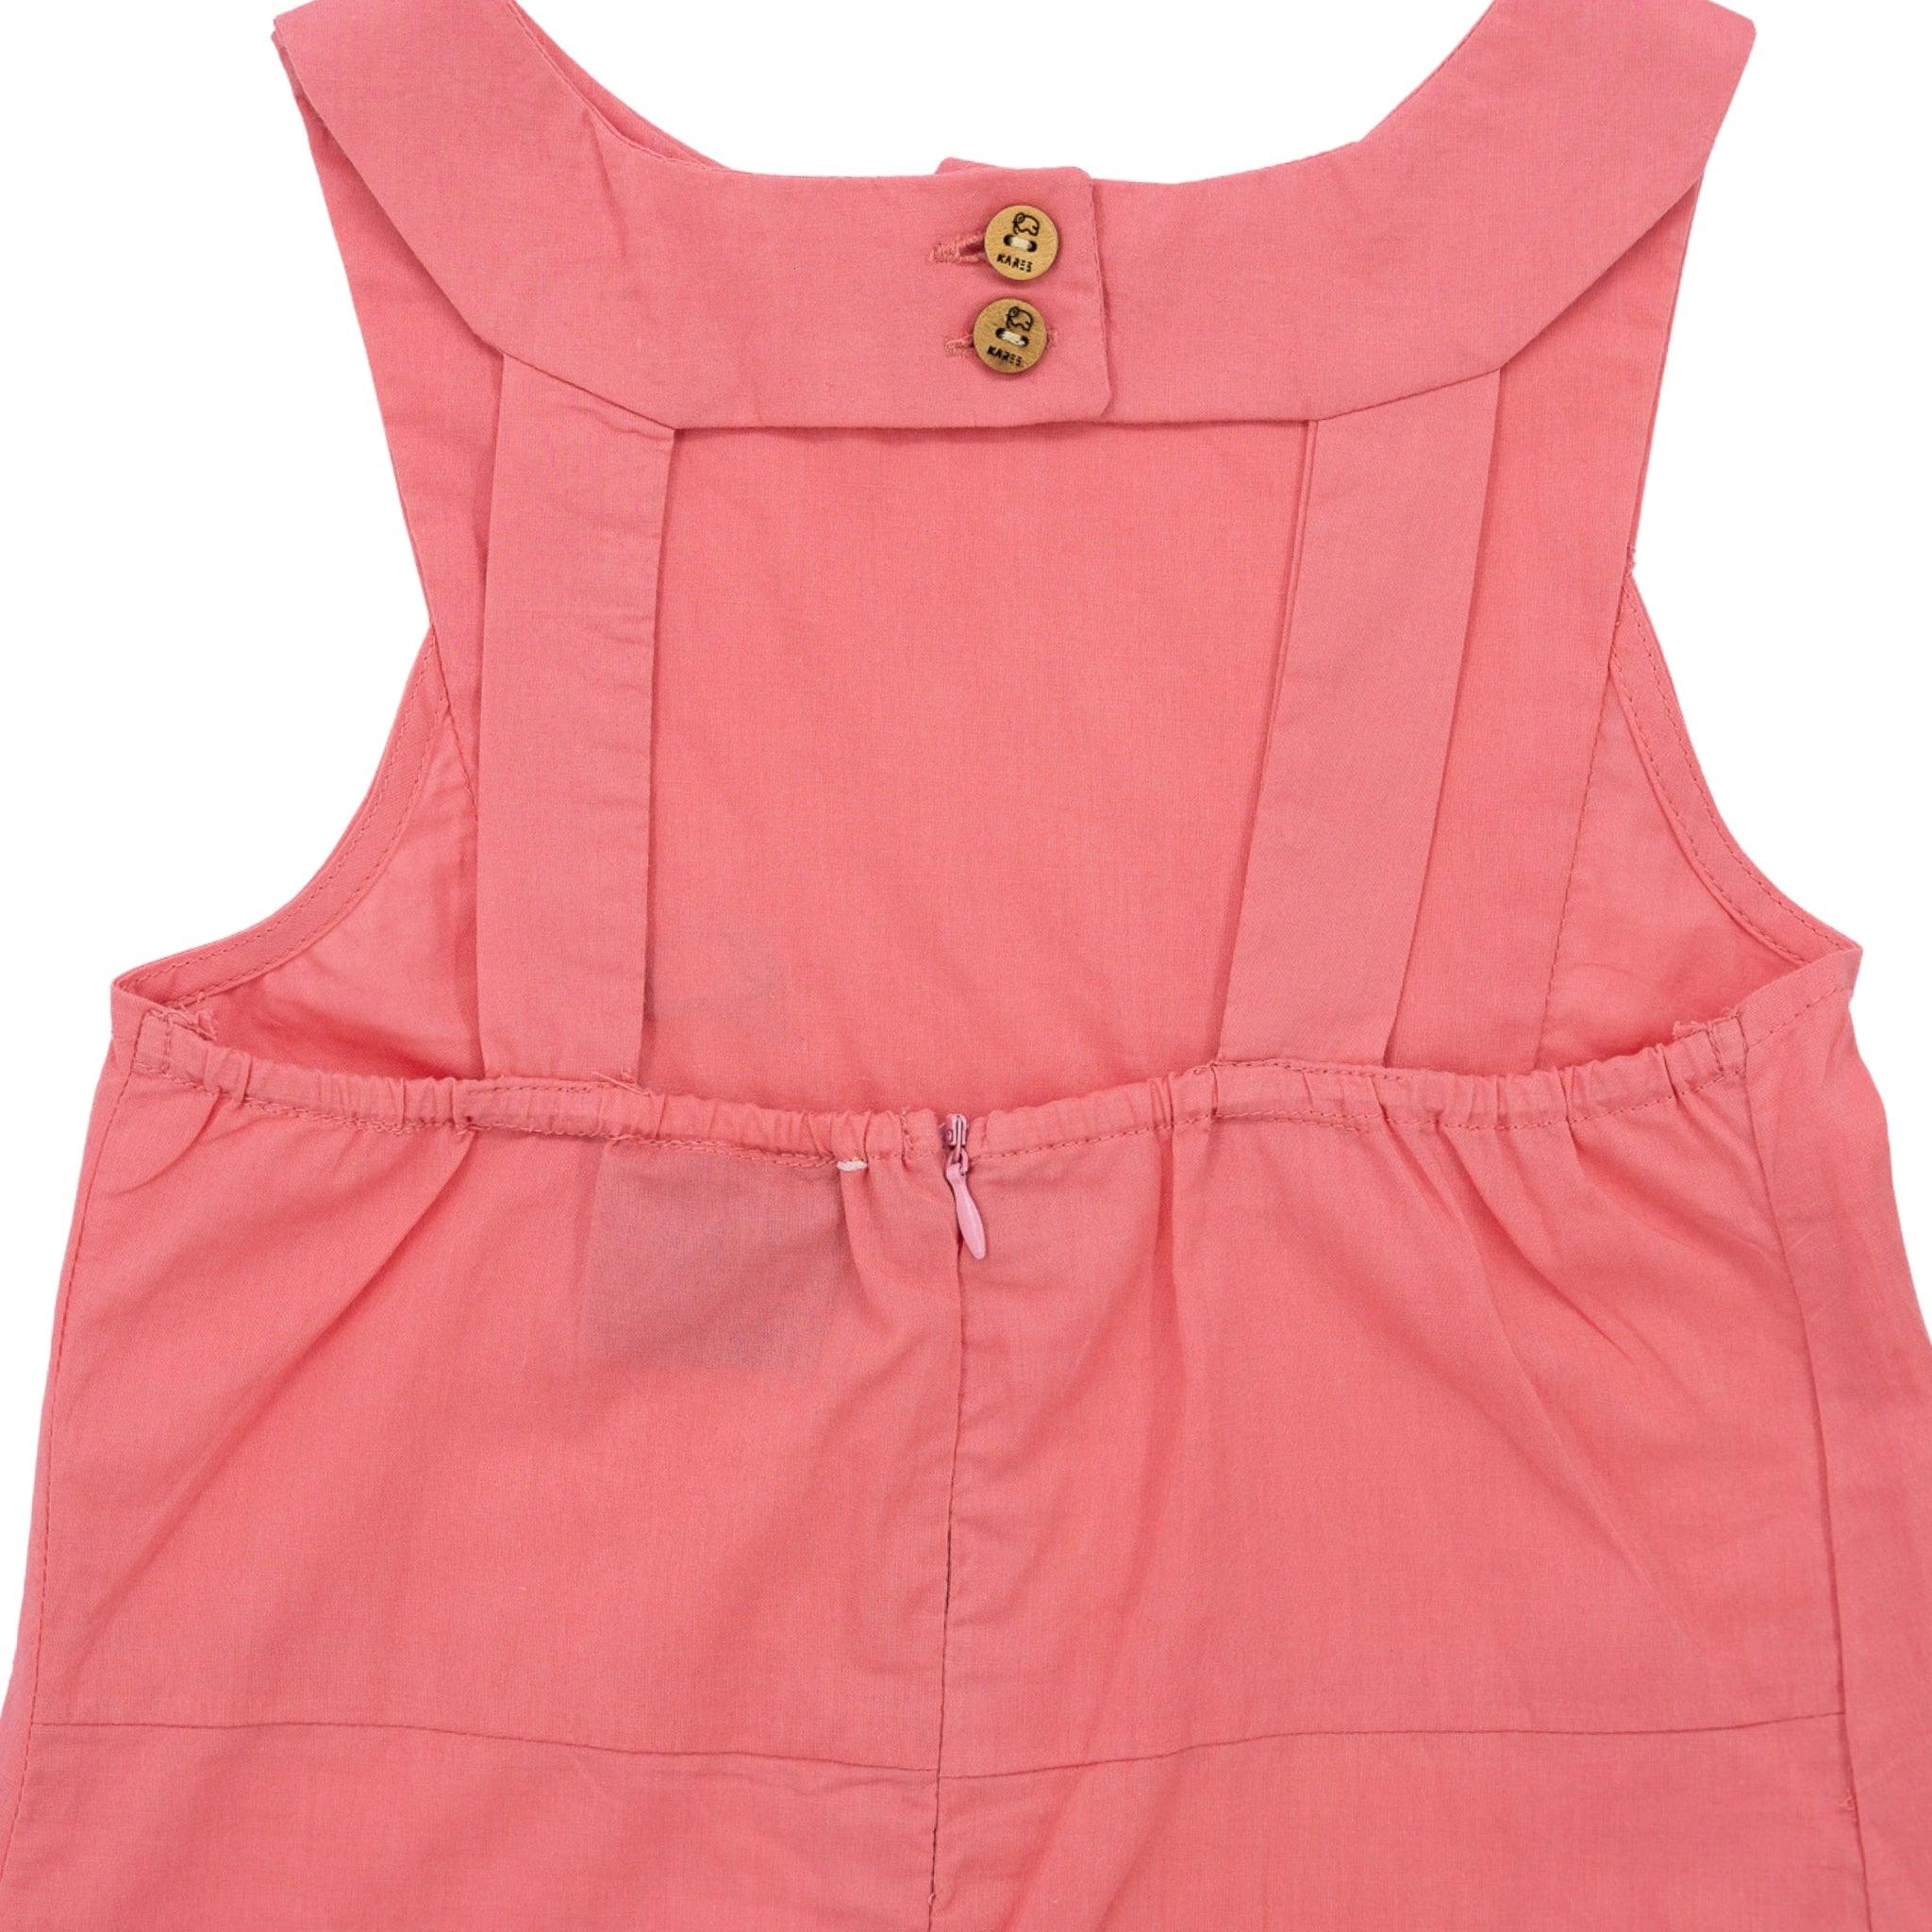 Close-up of a Karee Tea Rose Cotton Bib Neck Top for kids with button details, waist tie, and made from breathable cotton.